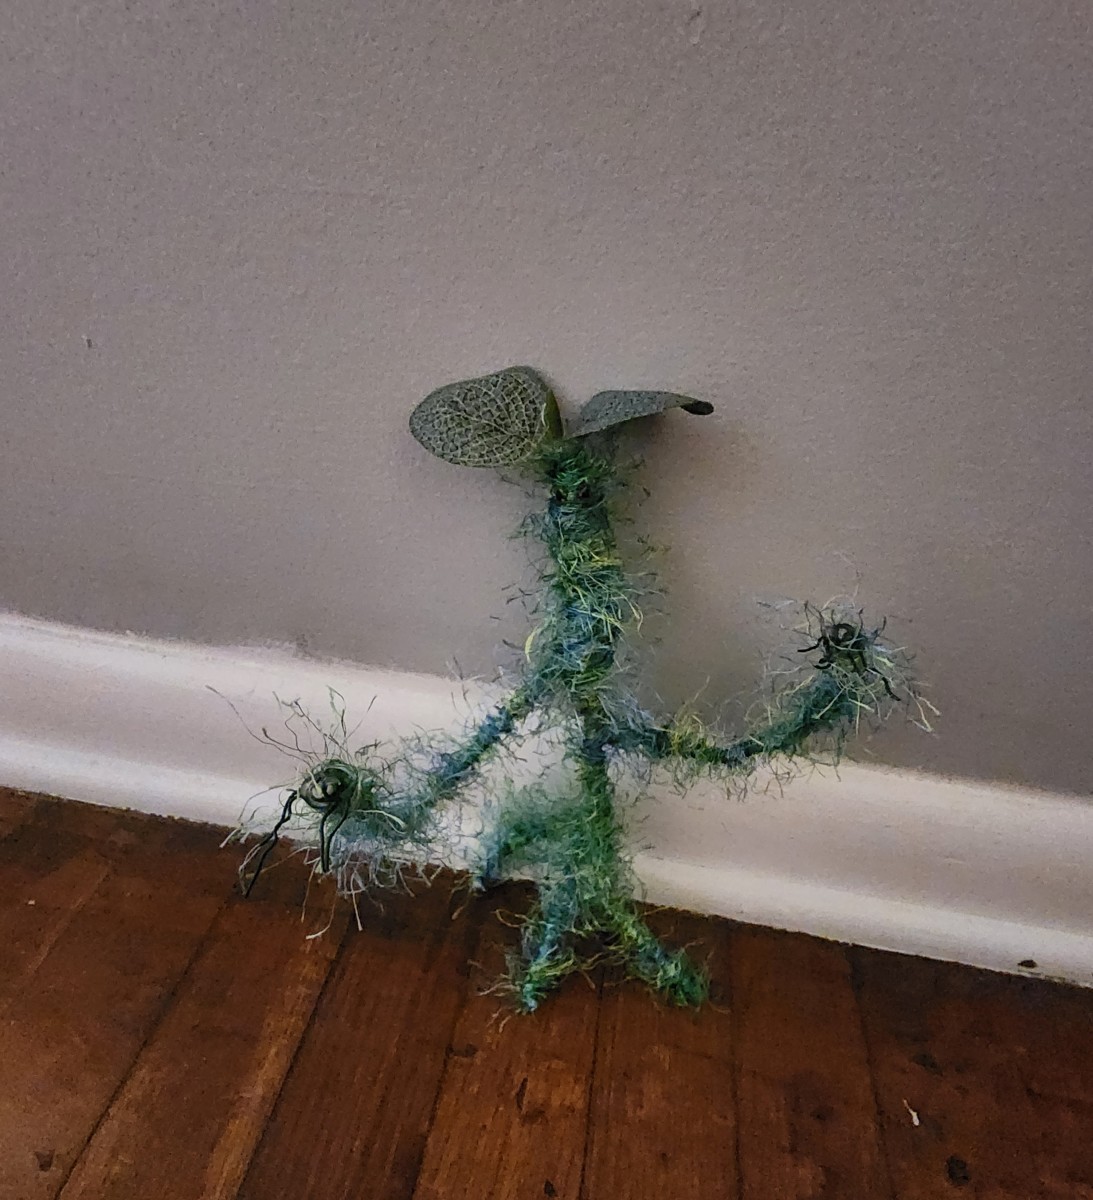 How to Make a Bowtruckle With Wire and Yarn